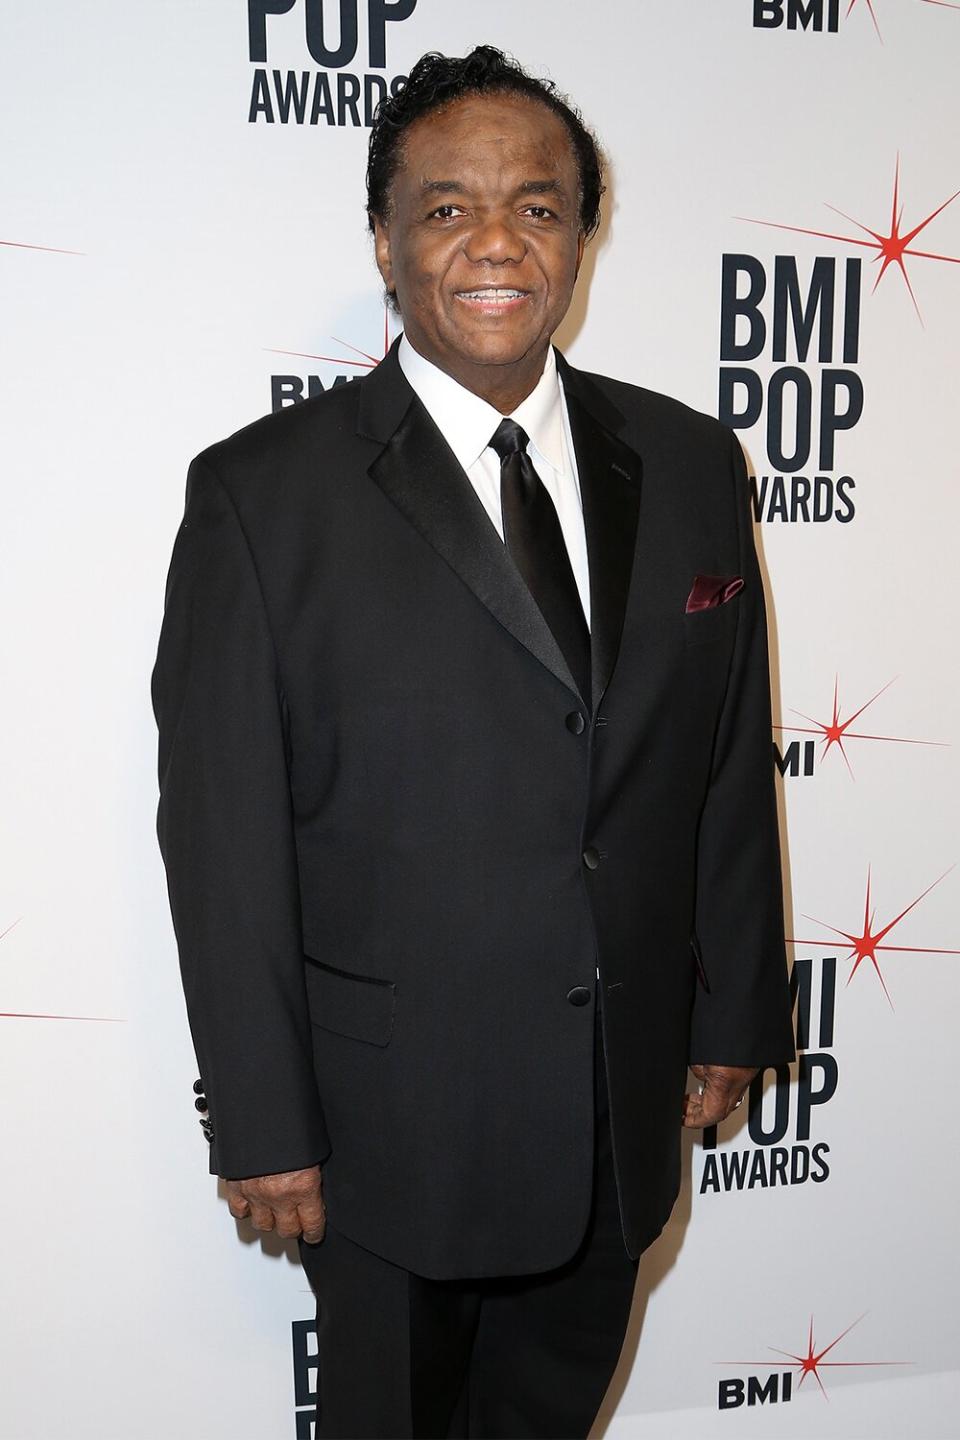 Songwriter Lamont Dozier attends the 2013 BMI Pop Awards at the Beverly Wilshire Four Seasons Hotel on May 14, 2013 in Beverly Hills, California.